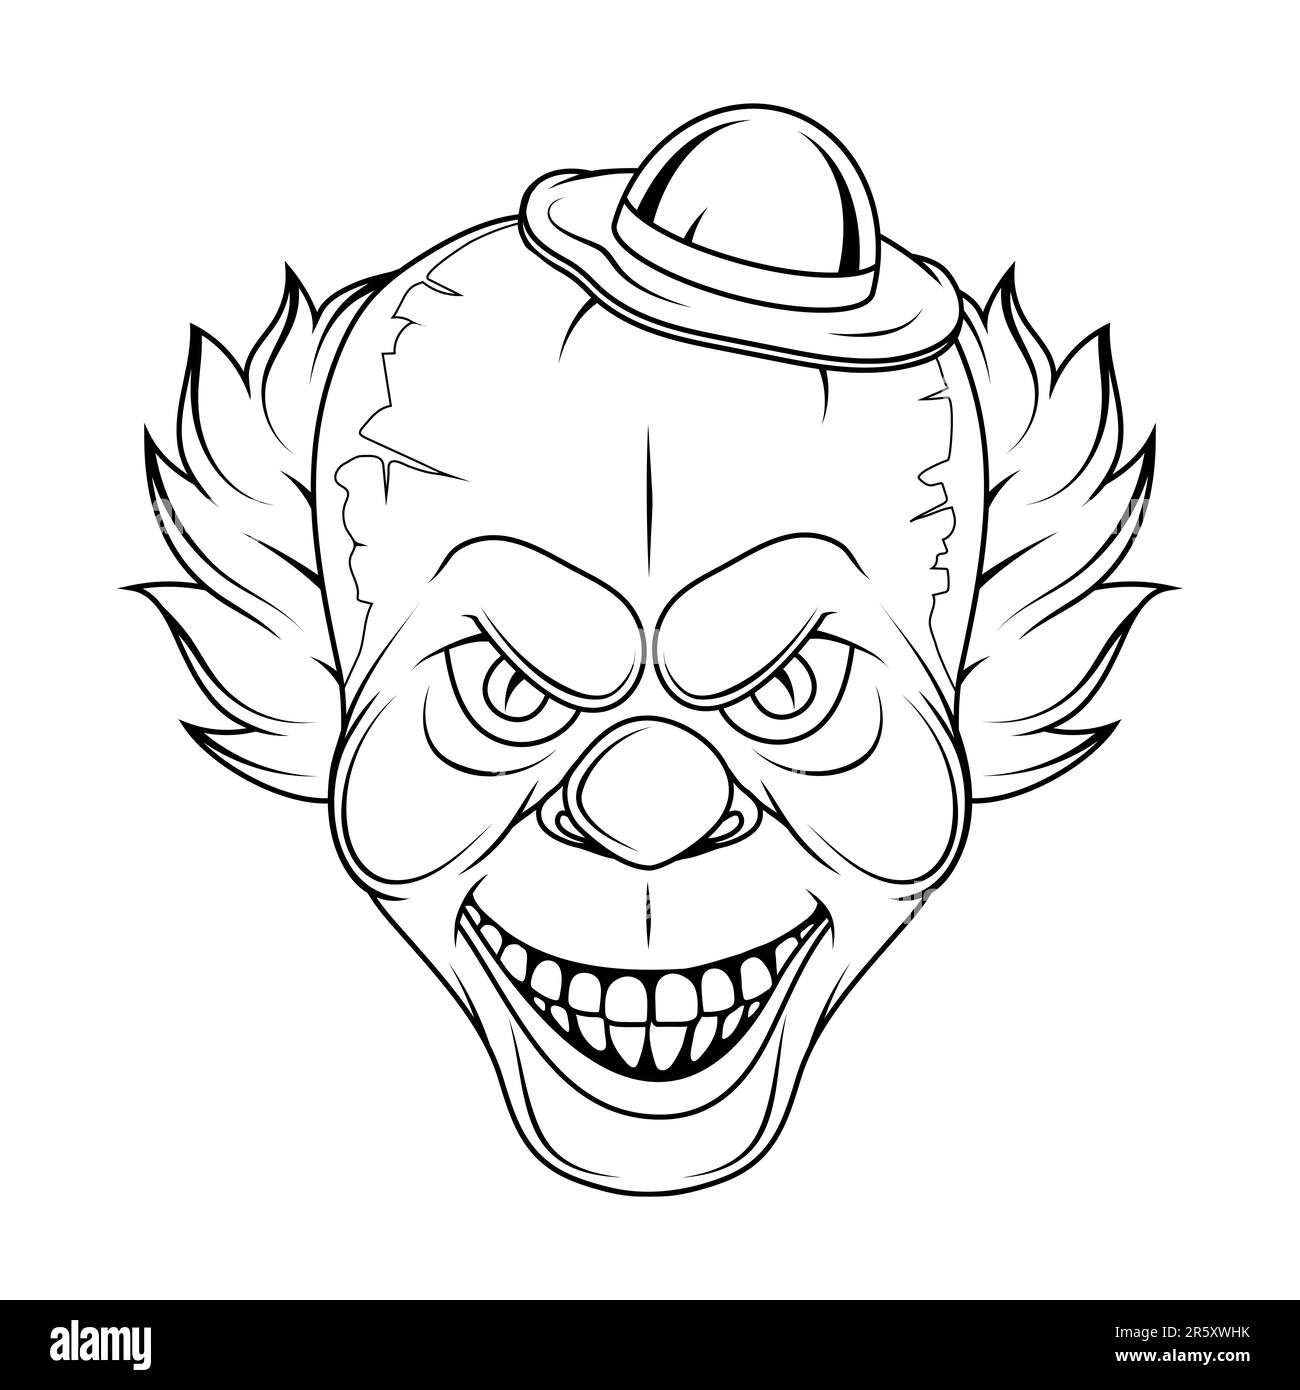 How to Draw a Scary Clown 🤡 Halloween Art - YouTube